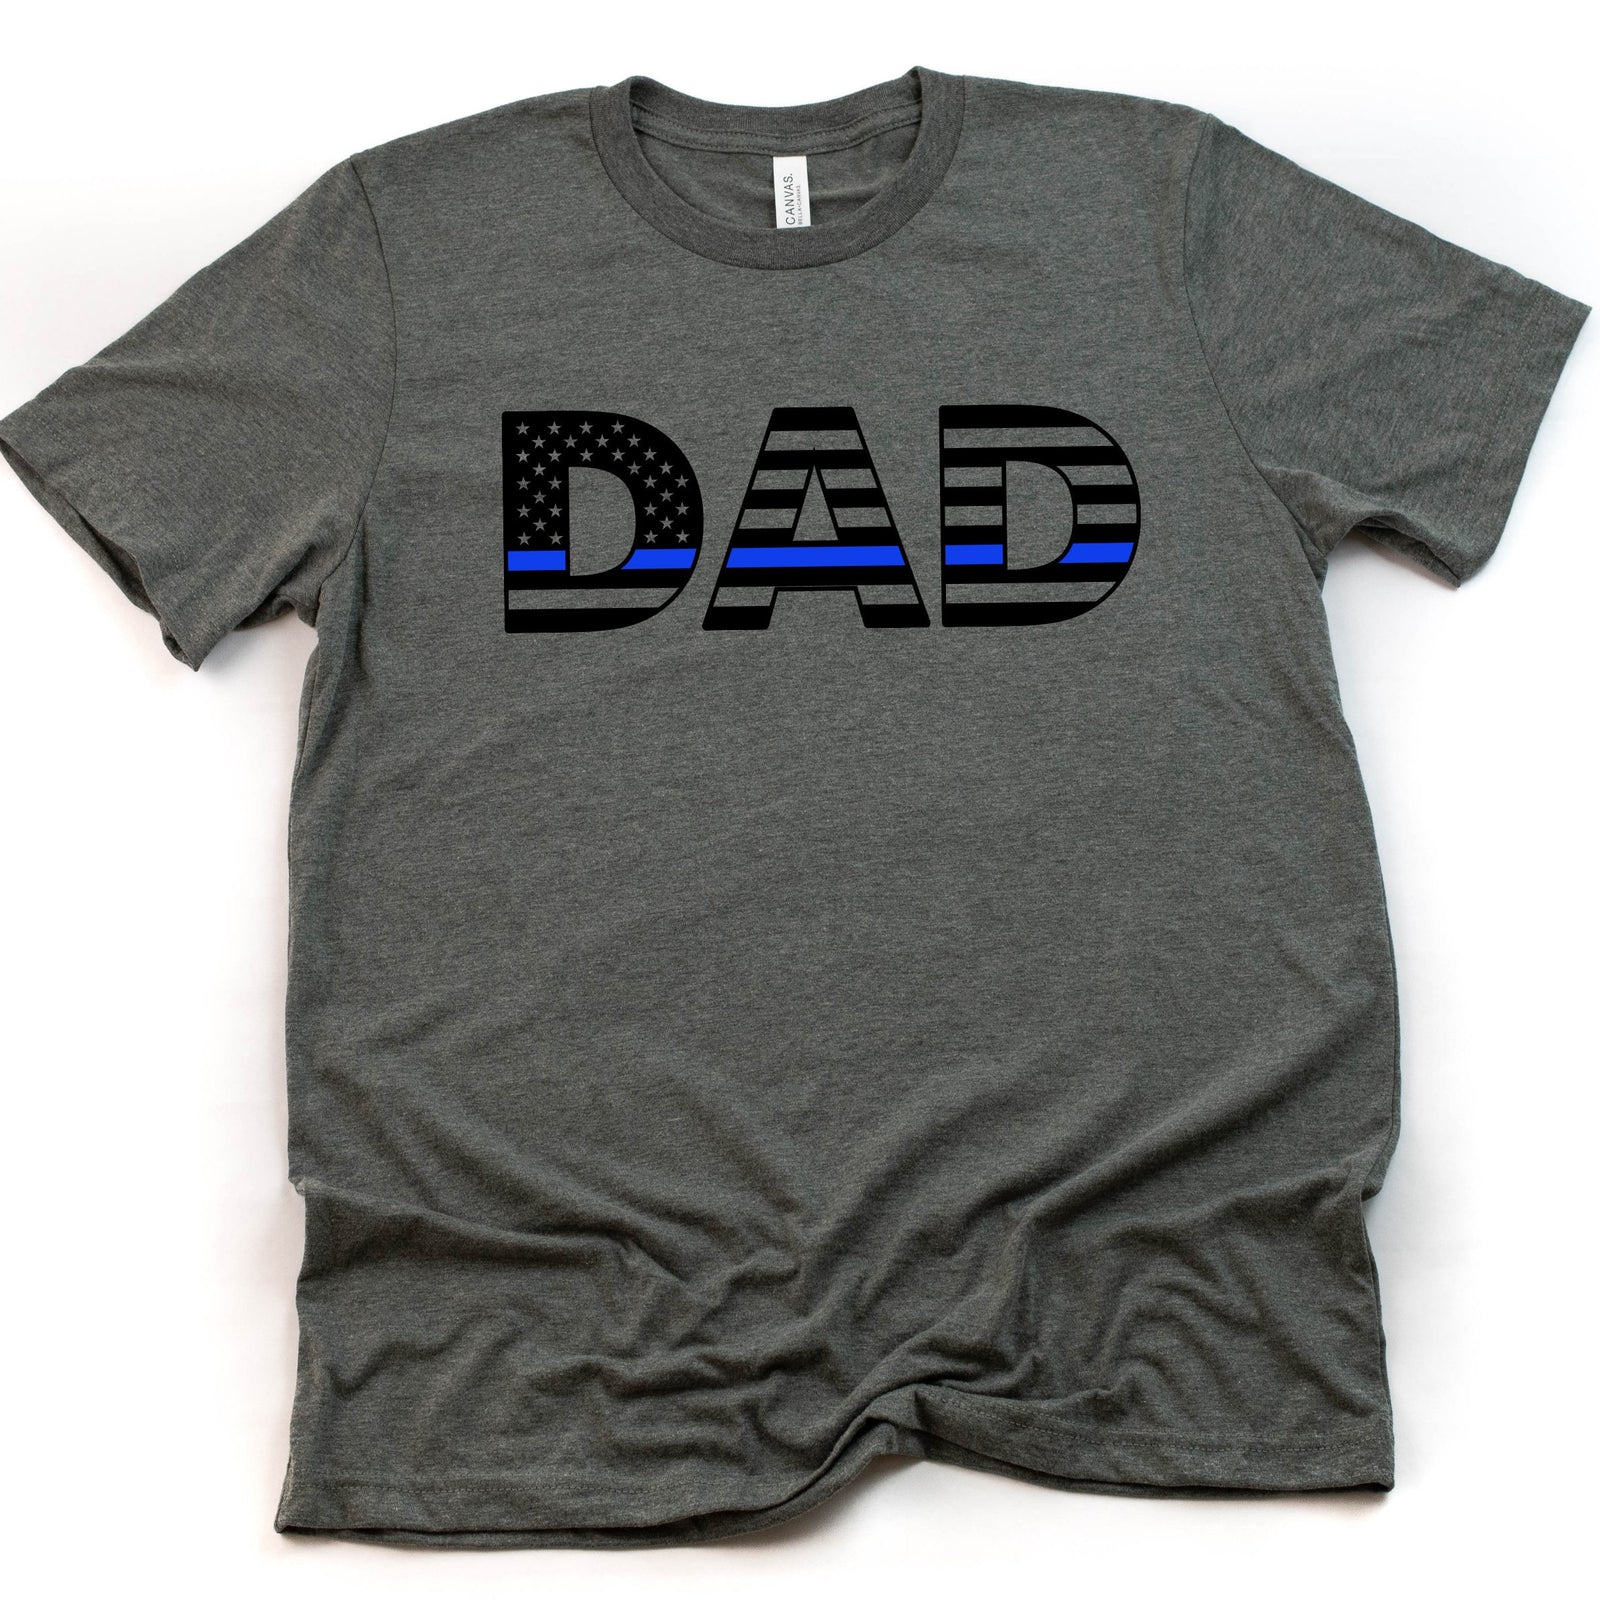 Police Officer Blue Line Adult Unisex T shirt - Blue Stripe Flag - Dad - Daddy is my Hero - Father's Day